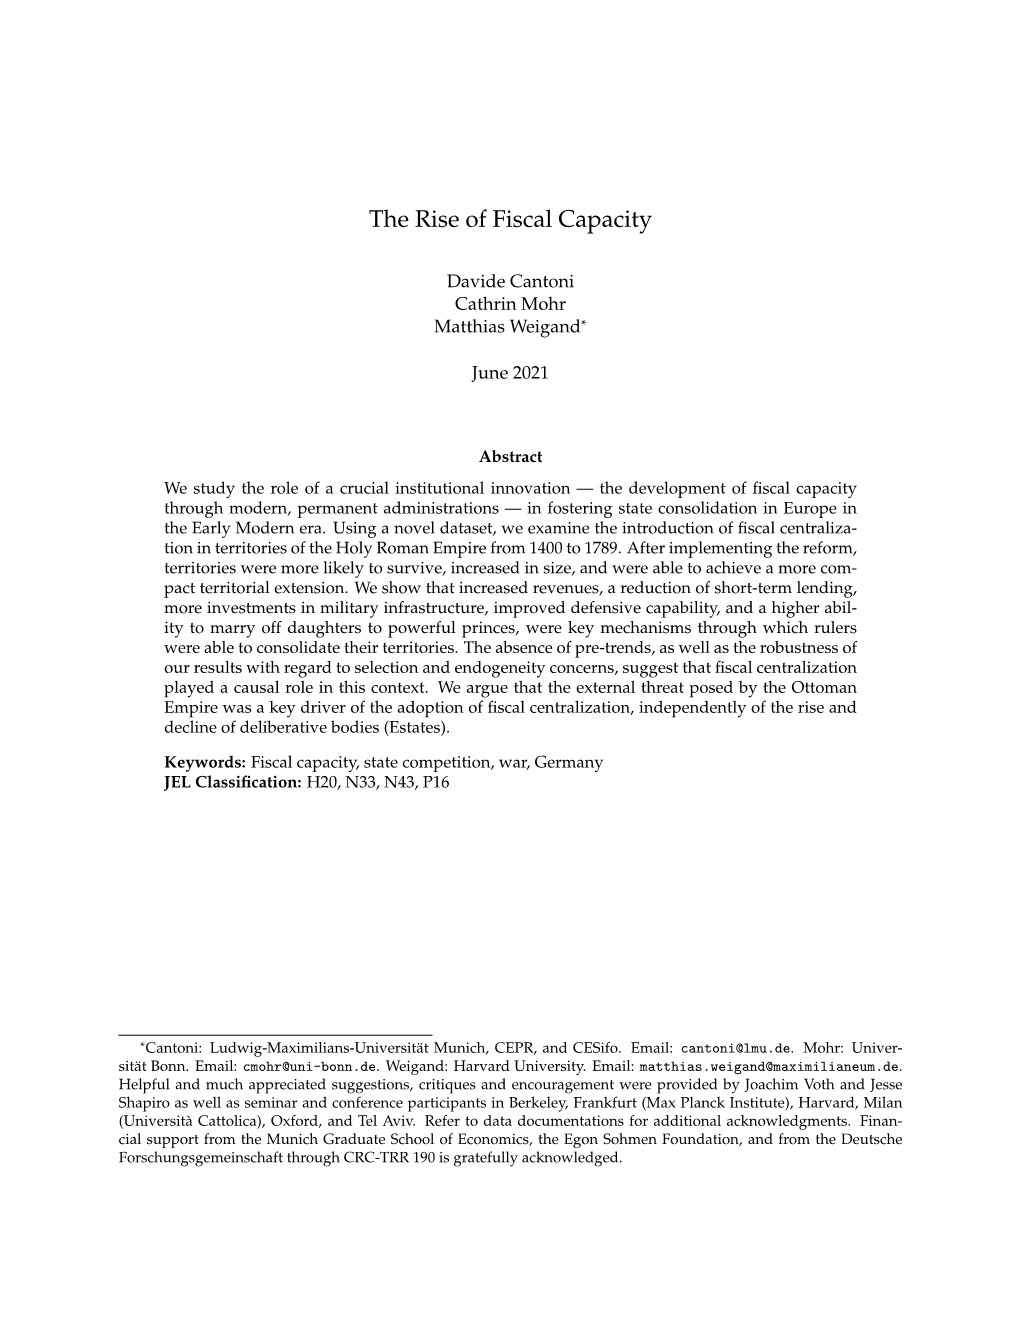 The Rise of Fiscal Capacity